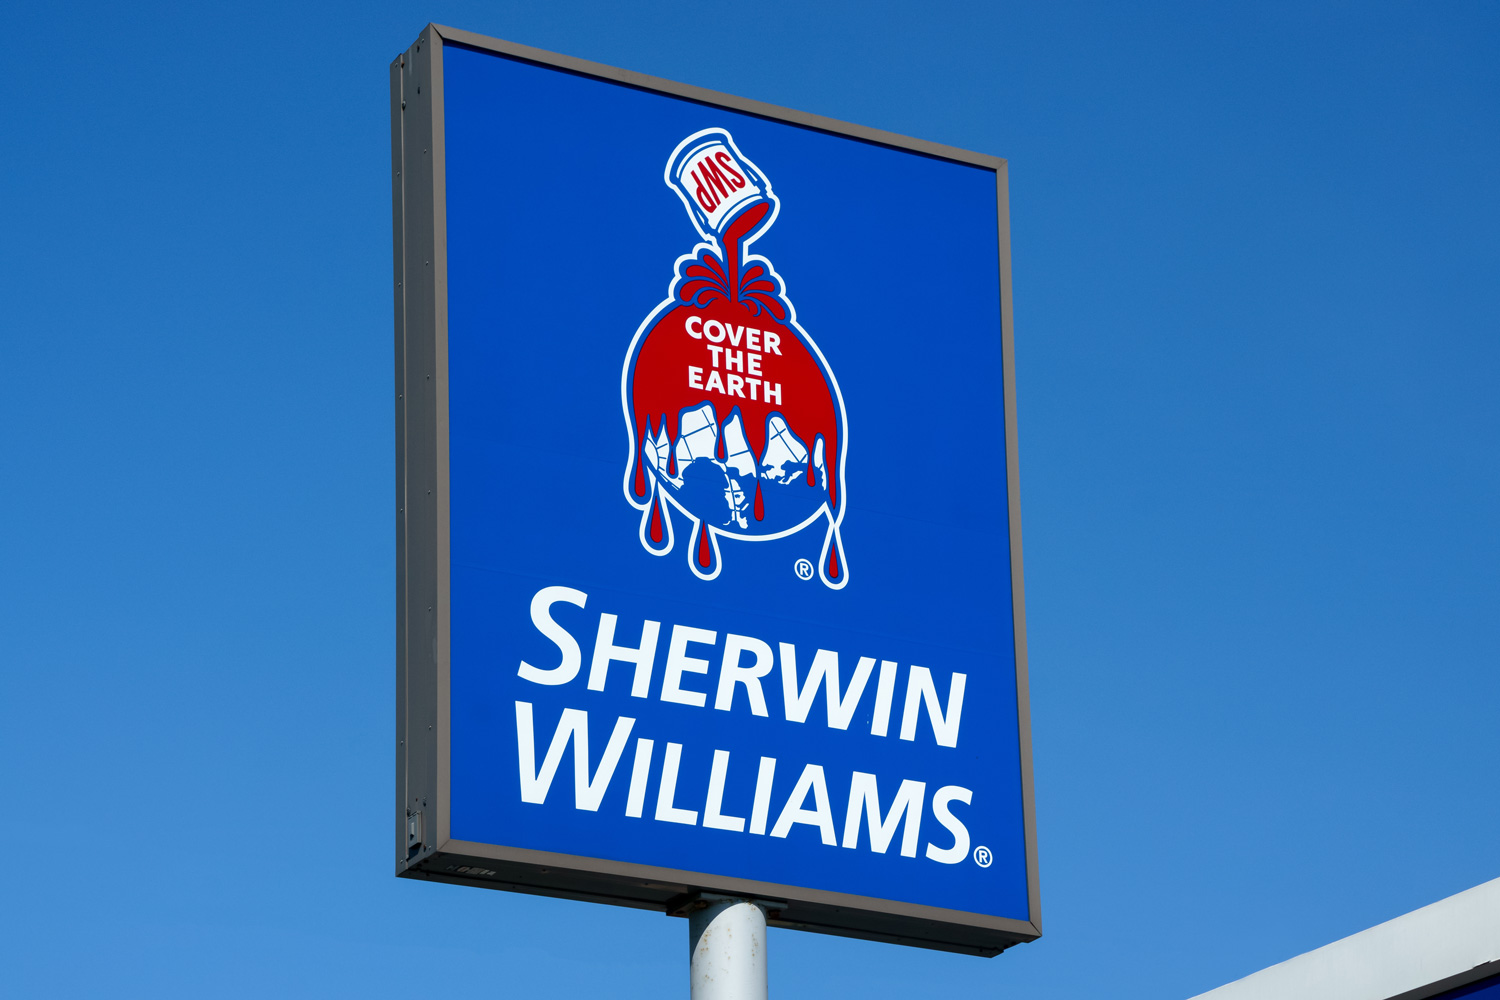 Sherwin-Williams paint store sign and logo. Sherwin Williams Company is an American company in the general building materials industry.